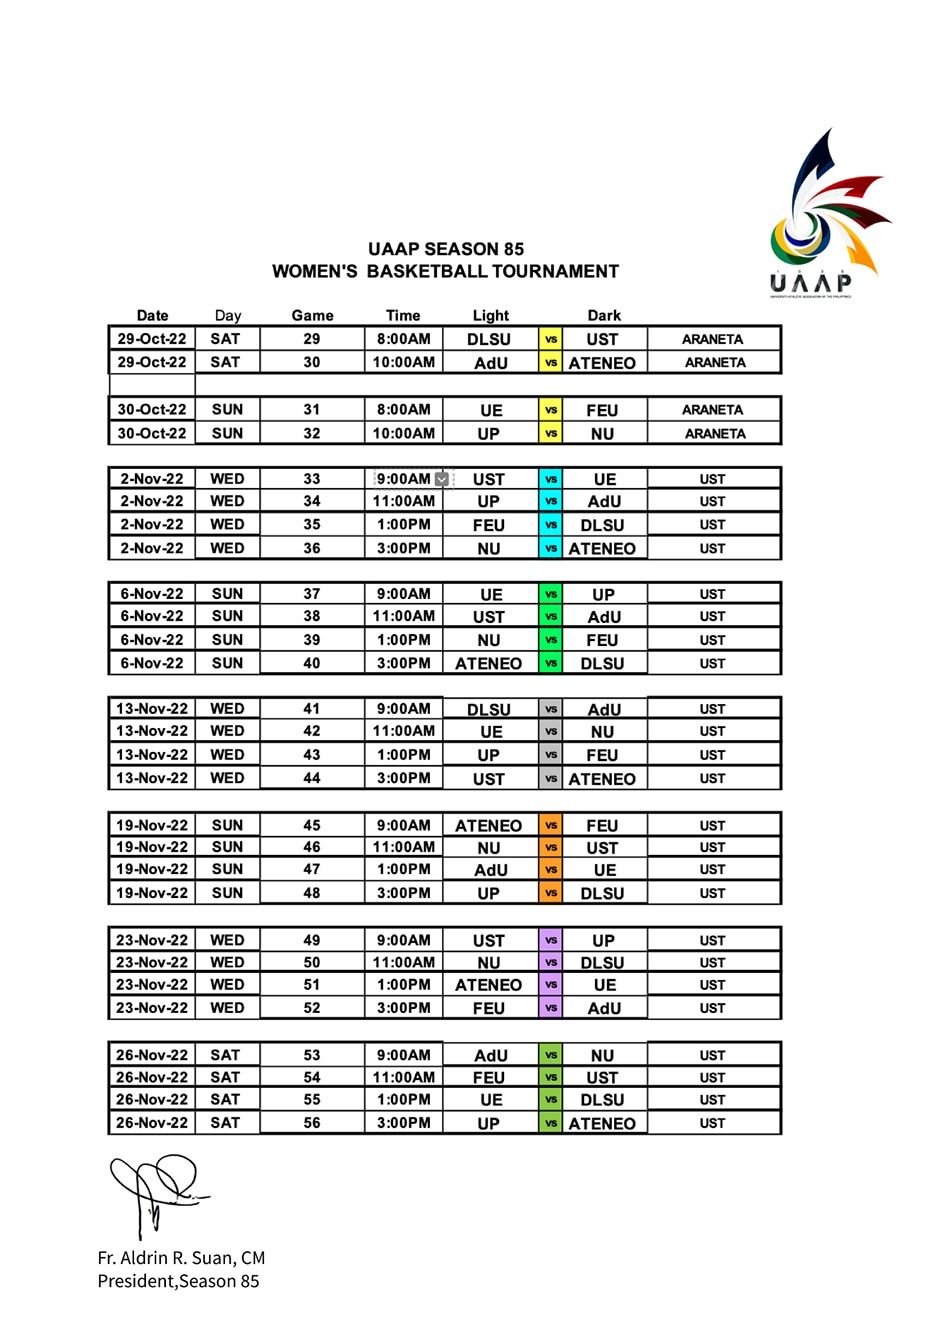 LOOK UAAP unveils 2nd round schedule for Season 85 ABS-CBN News